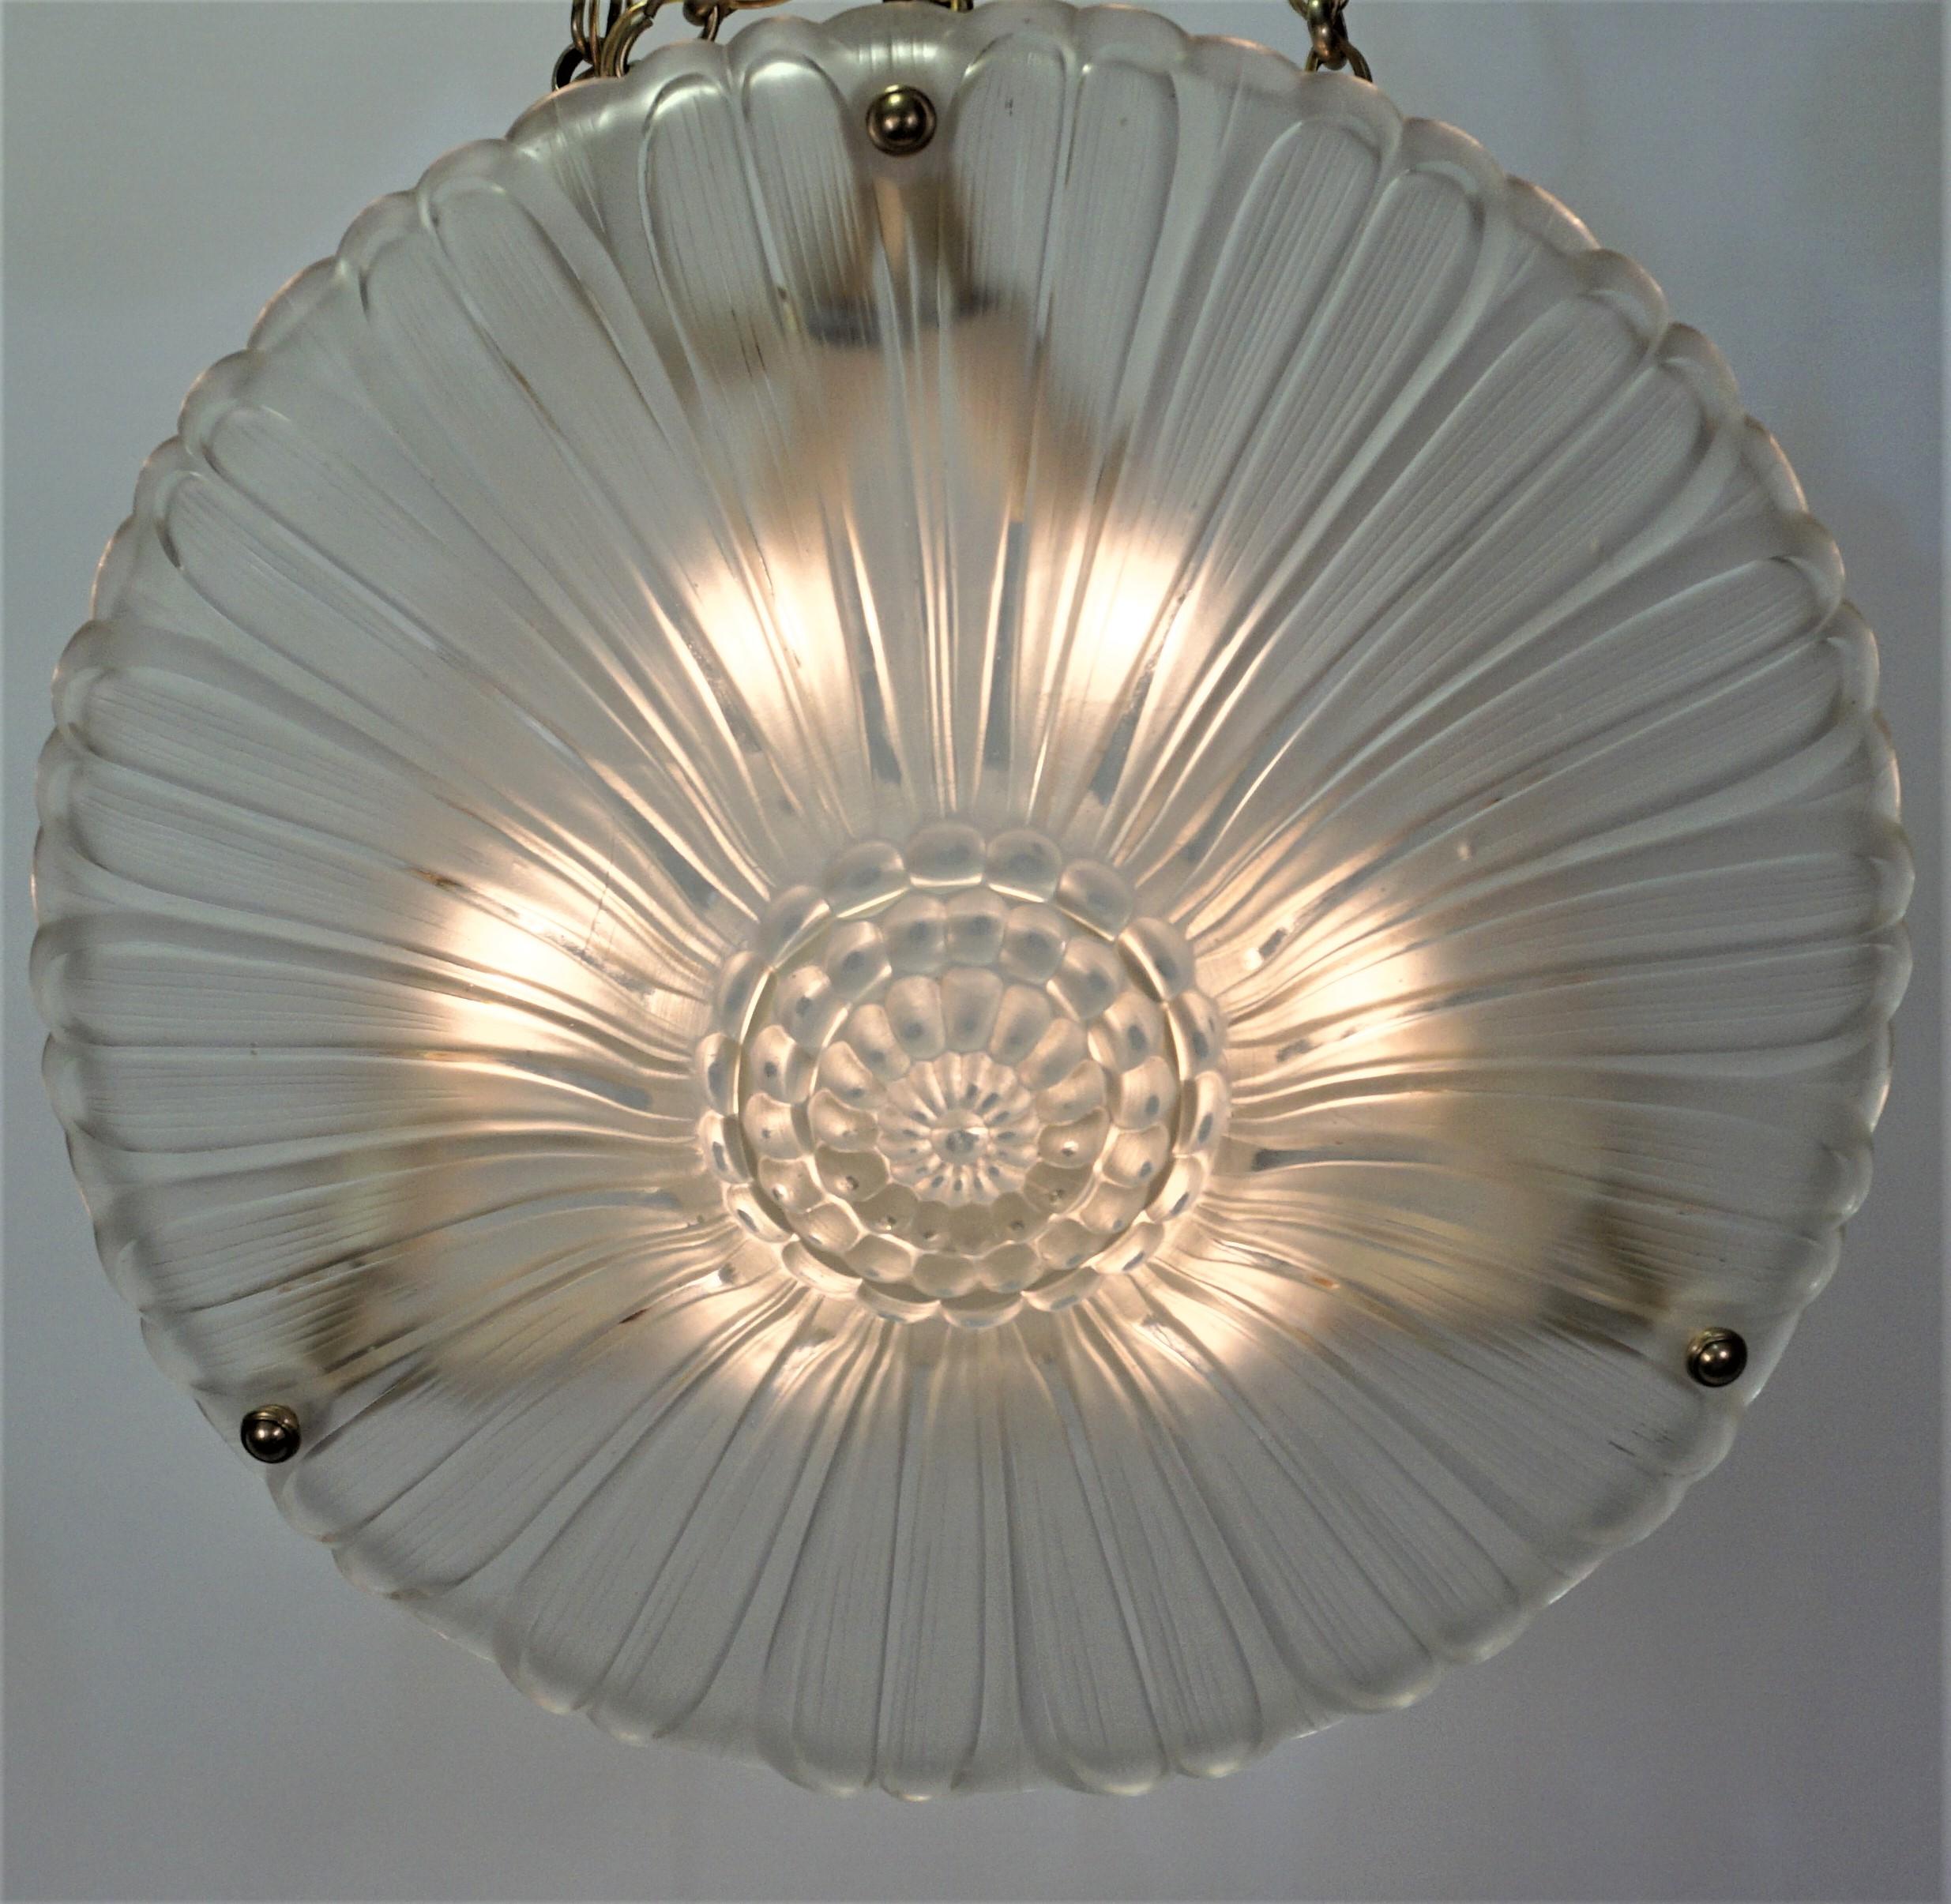 Mid-20th Century  French Art Deco Glass Chandelier with Bronze Mounting